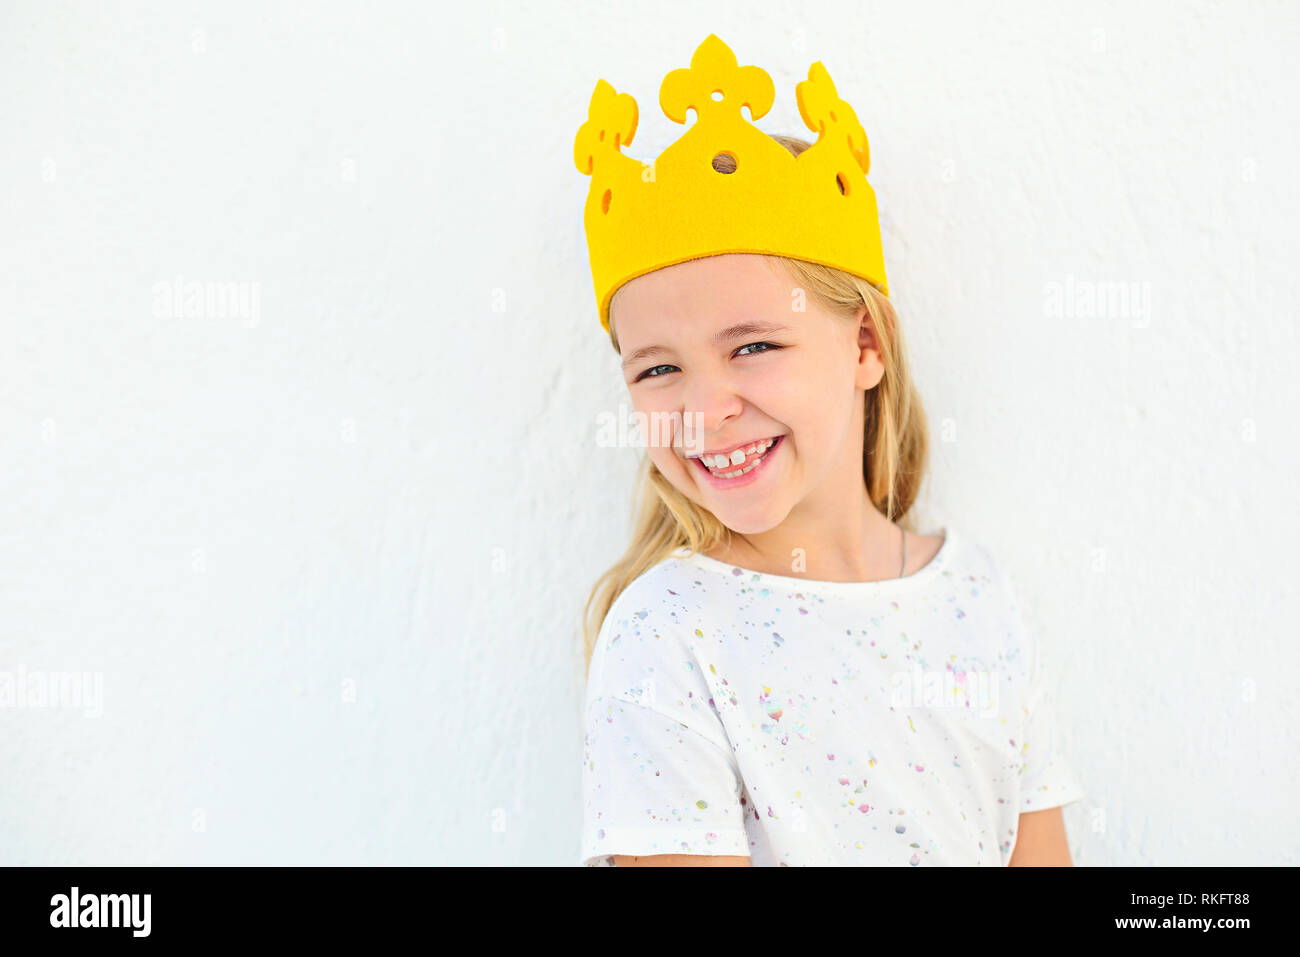 Cute little girl with blonde hair. Little girl with a crown on her head on a white background. Birthday girl Stock Photo